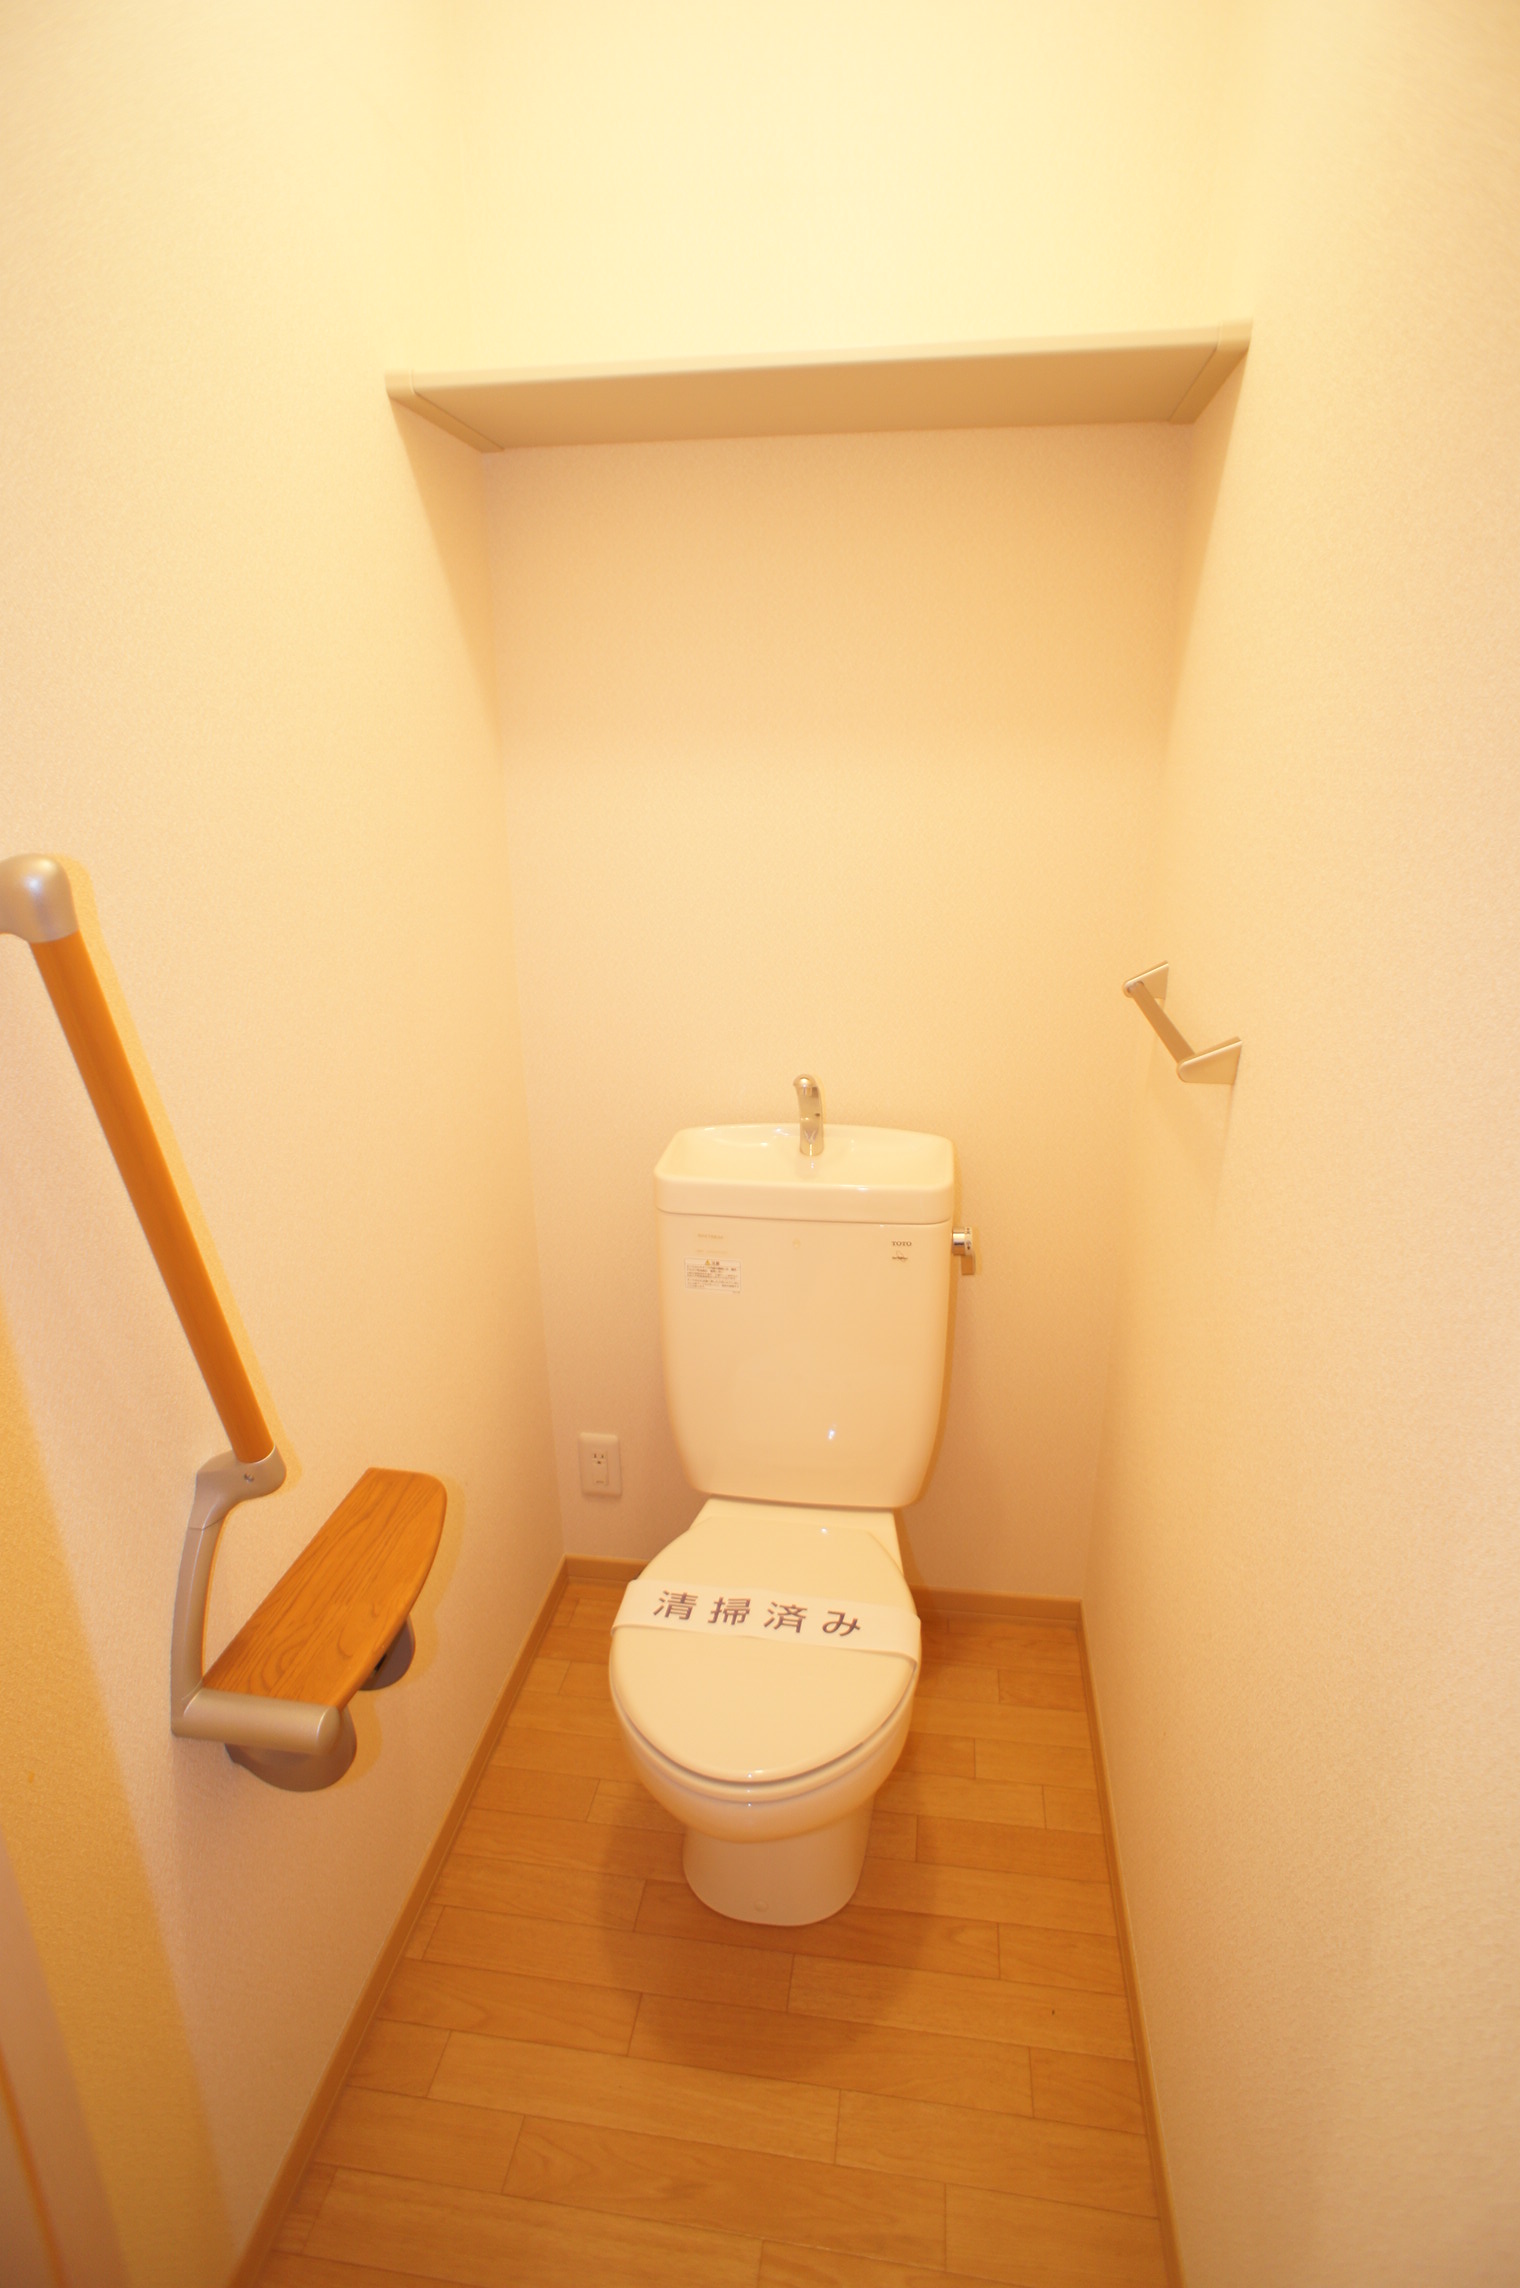 Toilet. handrail ・ There is a shelf at the top!